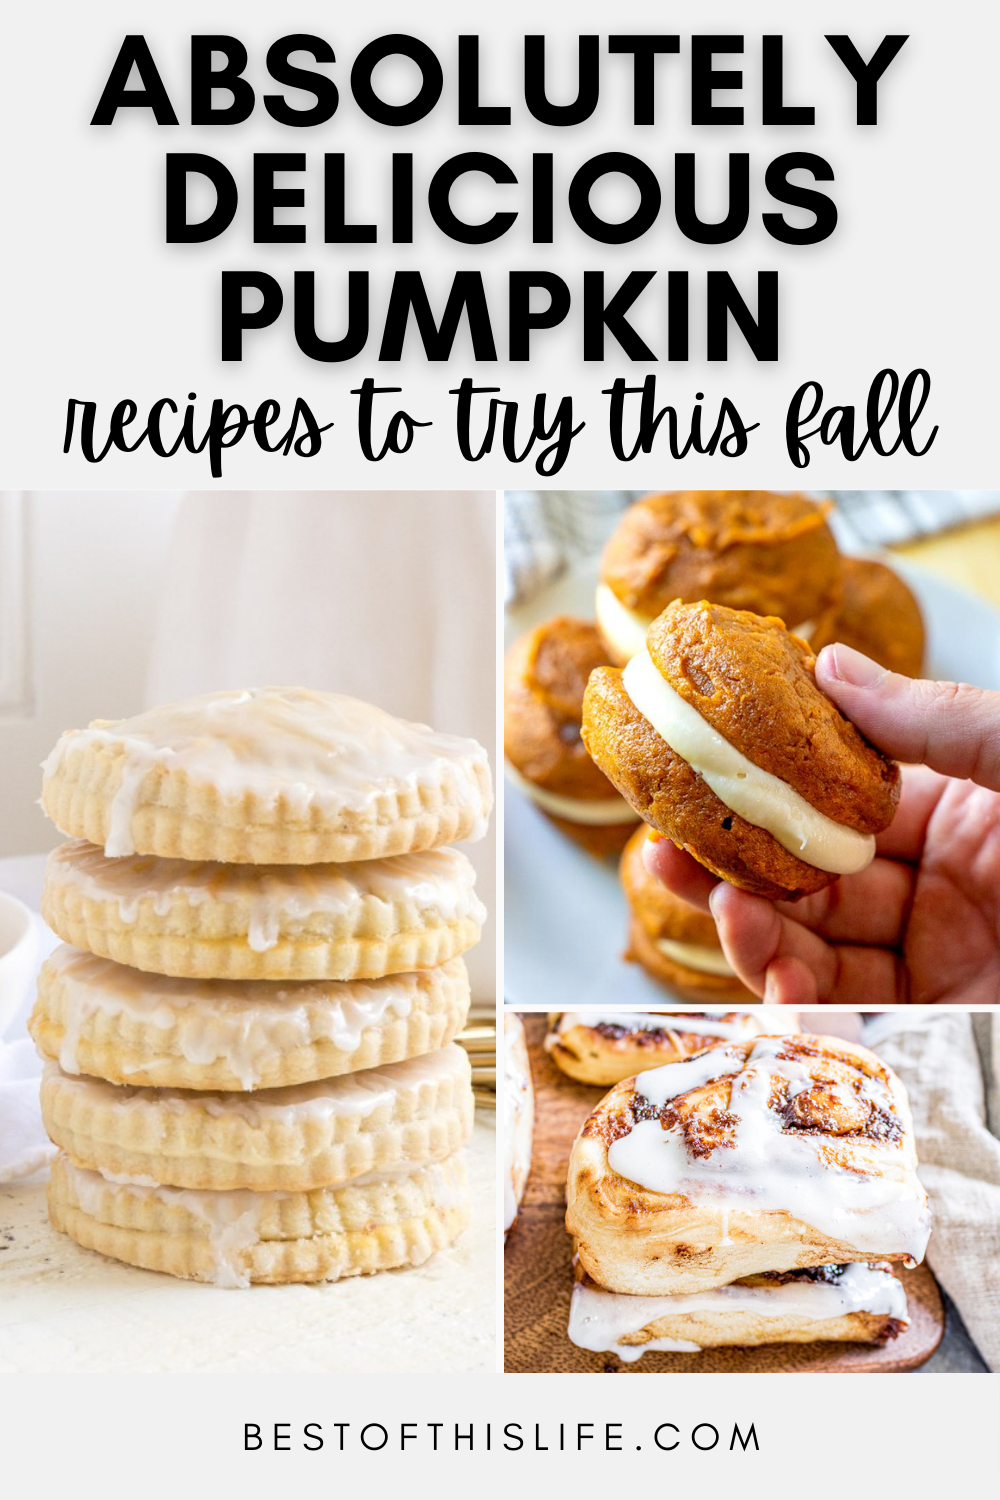 Absolutely Delicious Pumpkin Recipes to Try this Fall